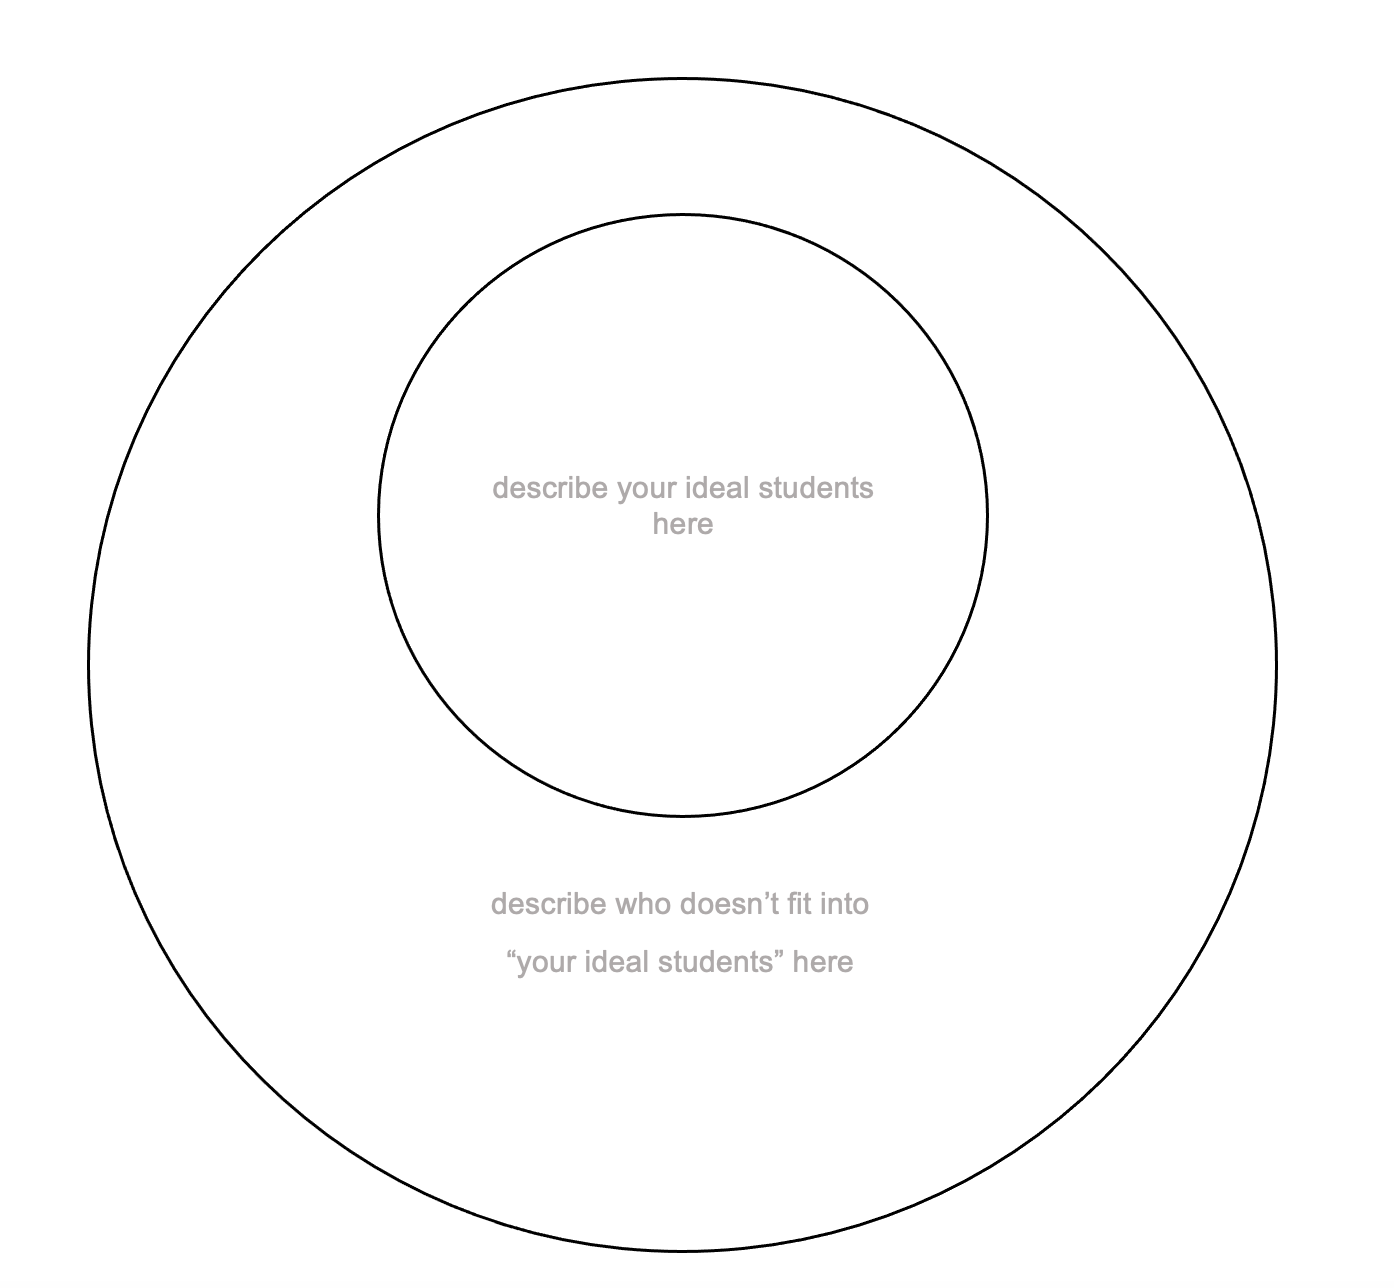 Two circles, one inside the other. Describe ideal students in inner circle. Describe others in outer circle.